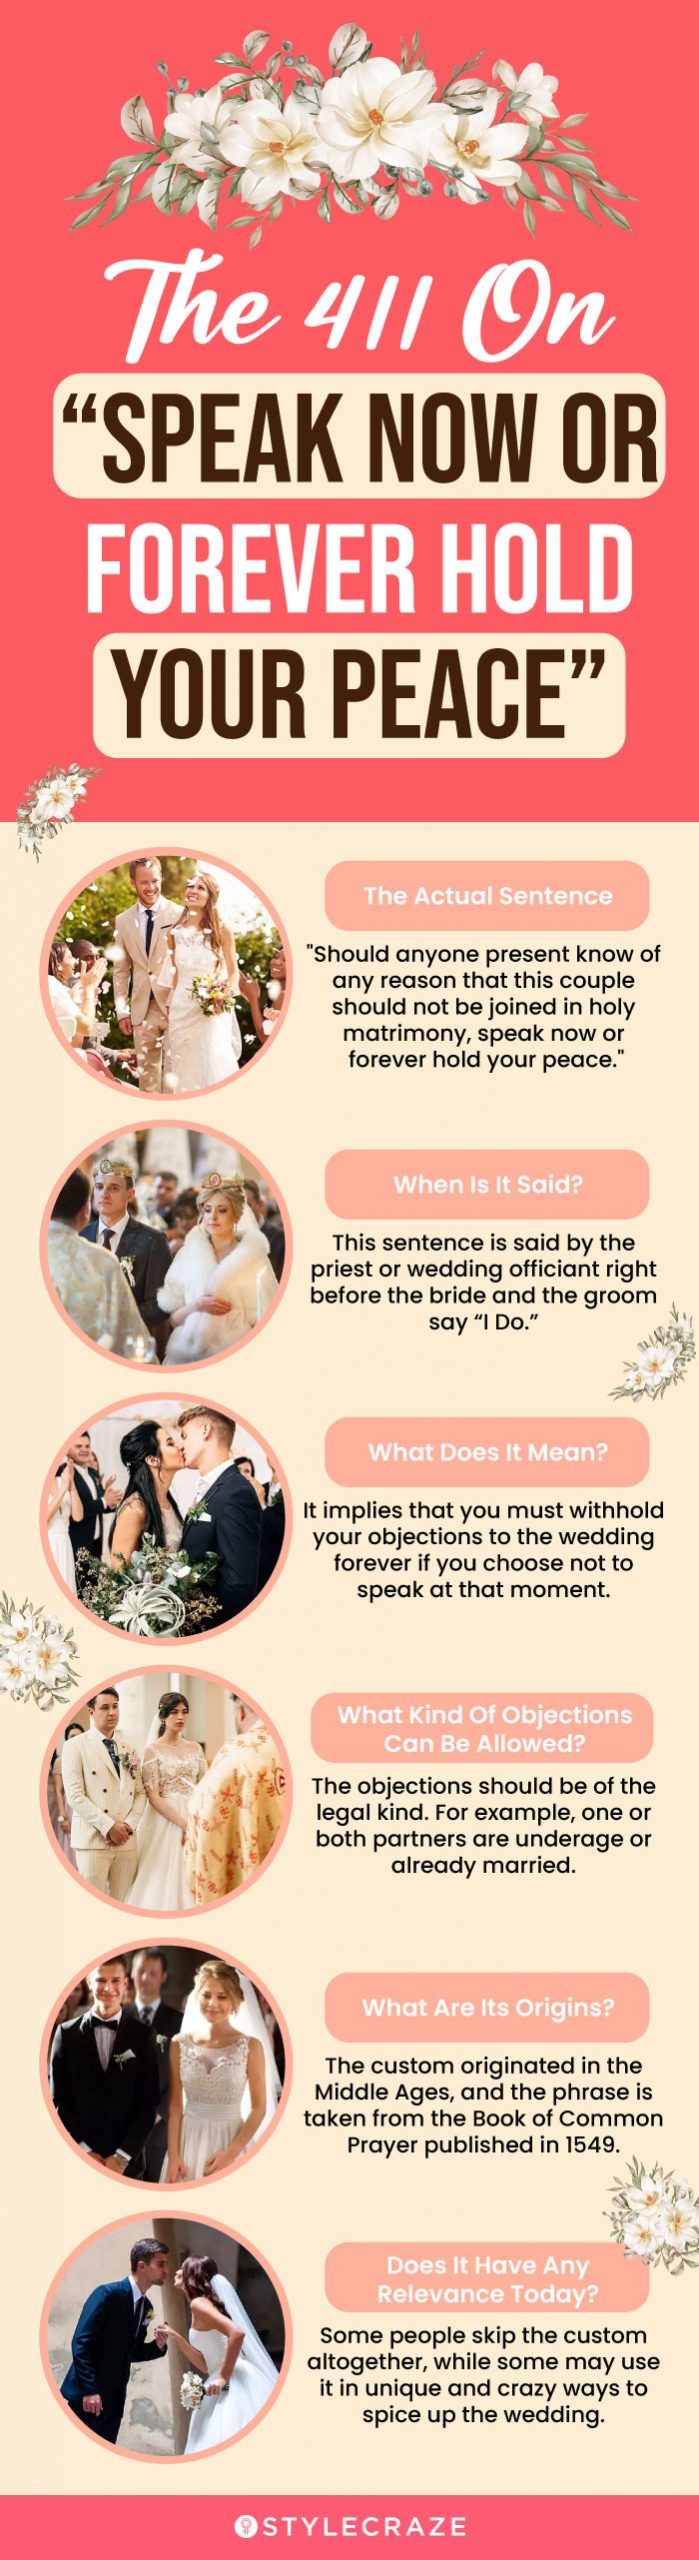 the 411 on speak now or forever hold your peace (infographic)